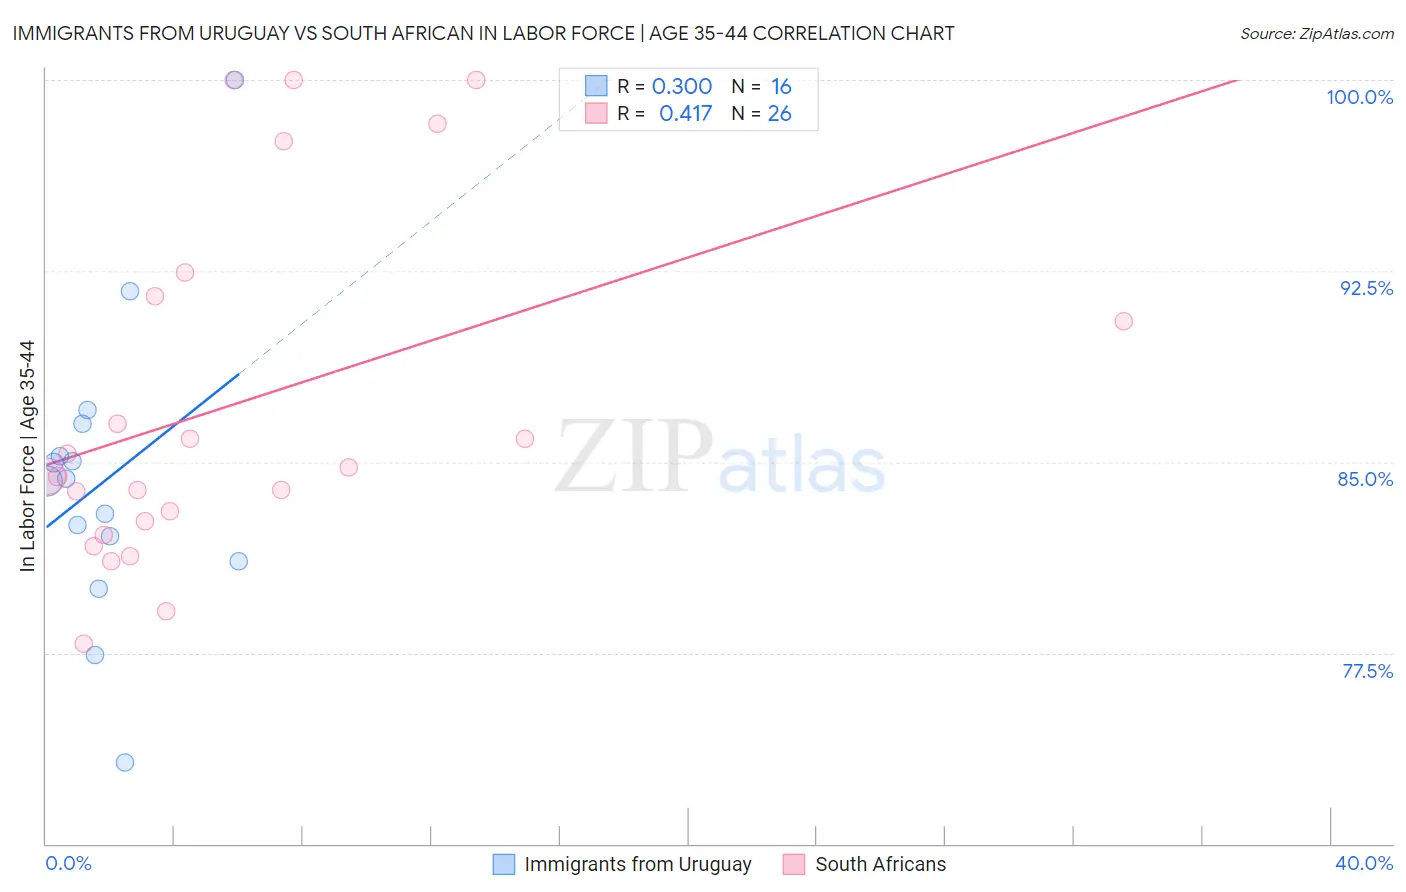 Immigrants from Uruguay vs South African In Labor Force | Age 35-44